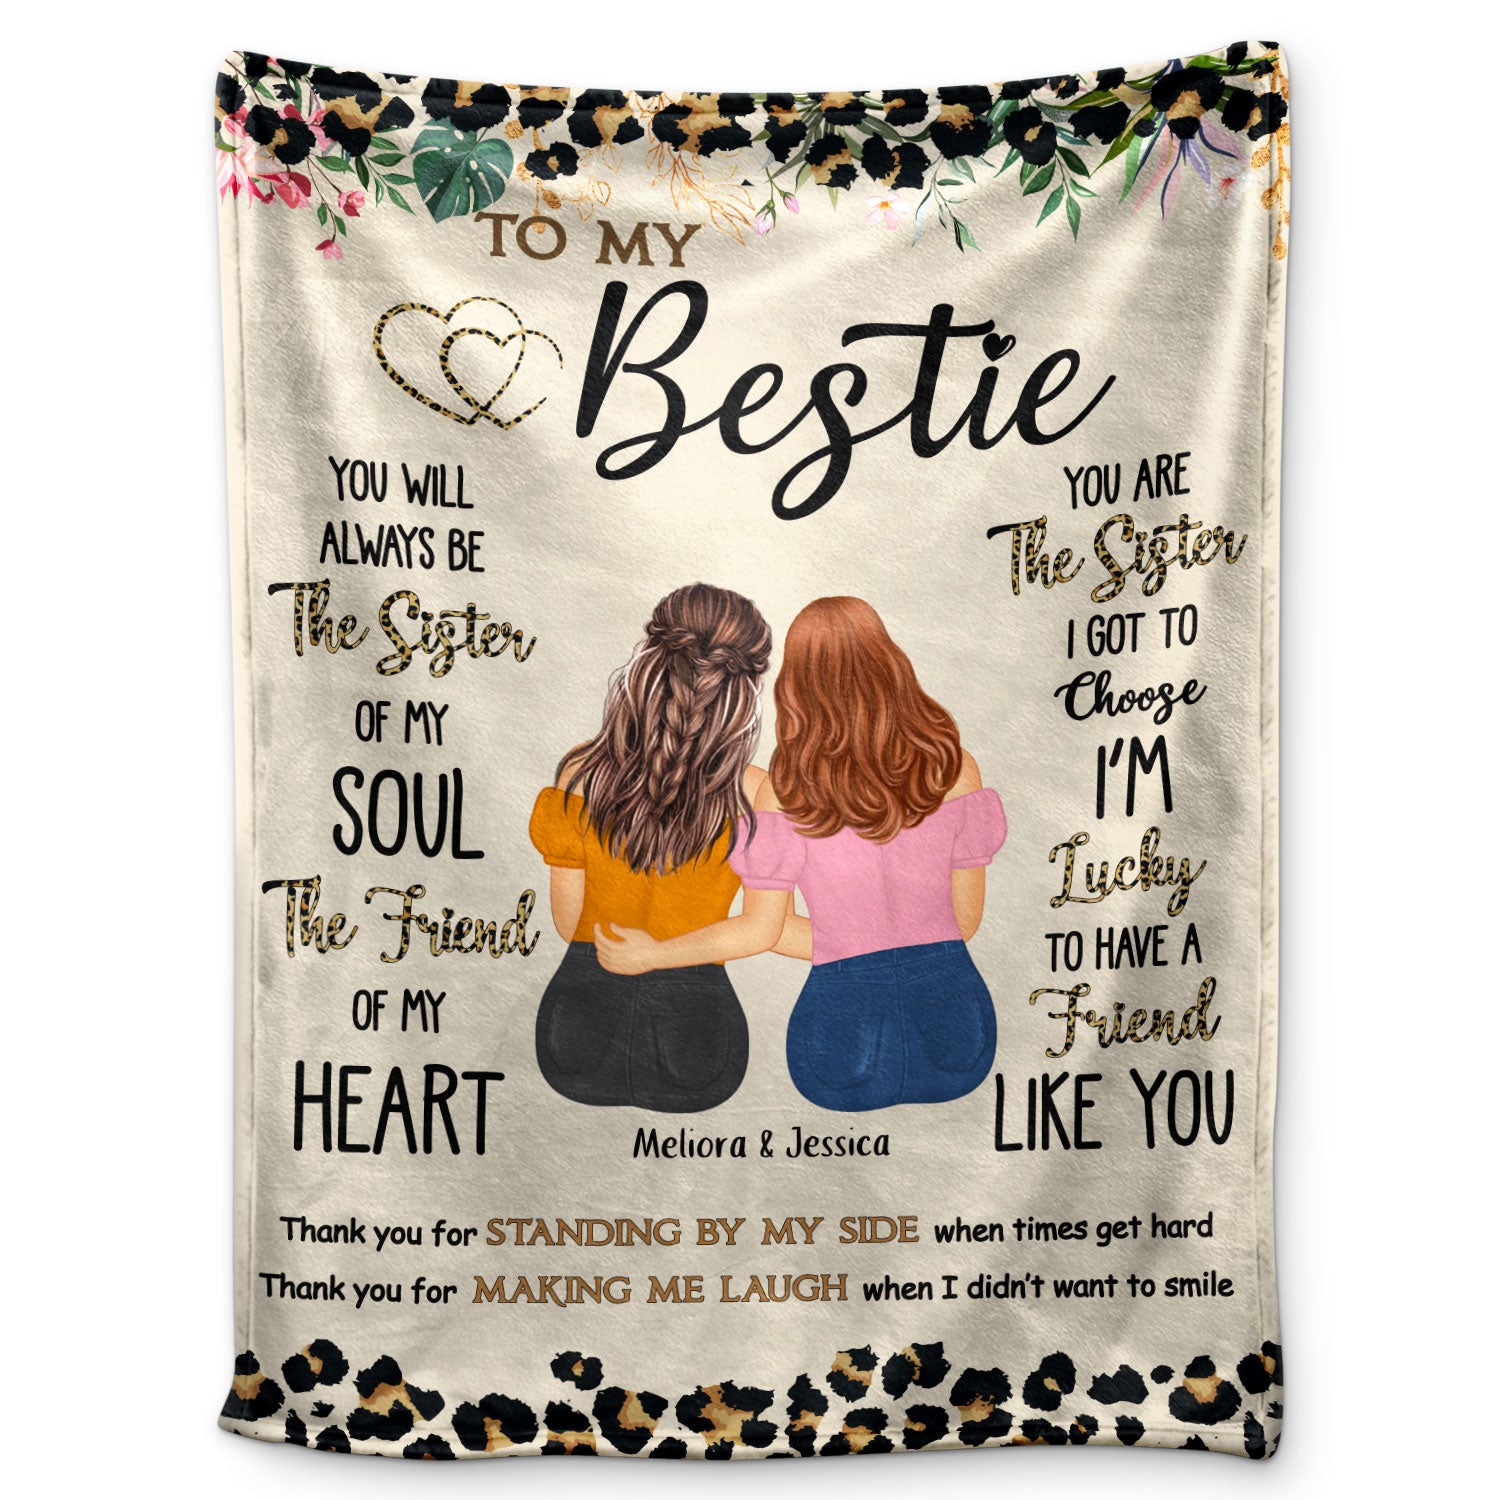 Thank You For Standing By My Side - Birthday Gift For Besties, BFF Best Friends, Sisters - Personalized Fleece Blanket